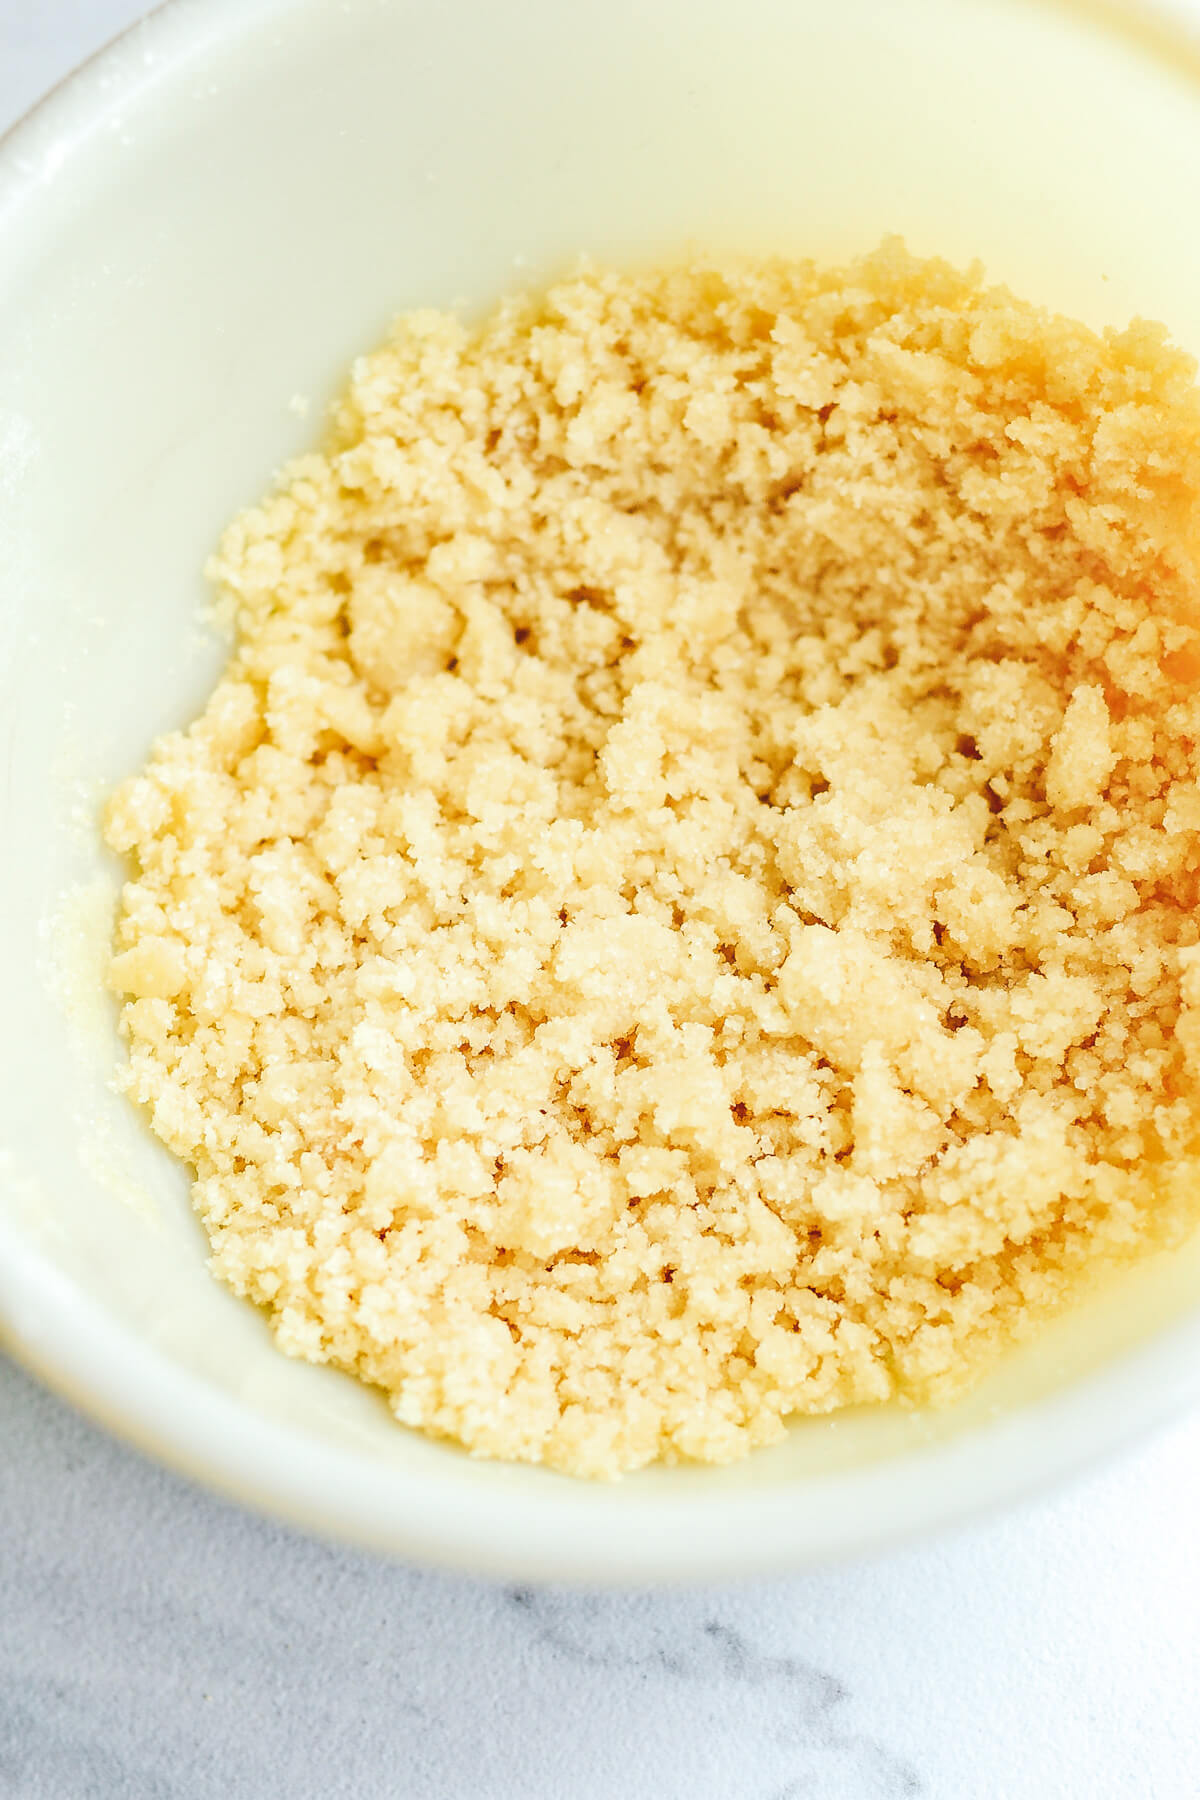 Coarse streusel topping in a mixing bowl.